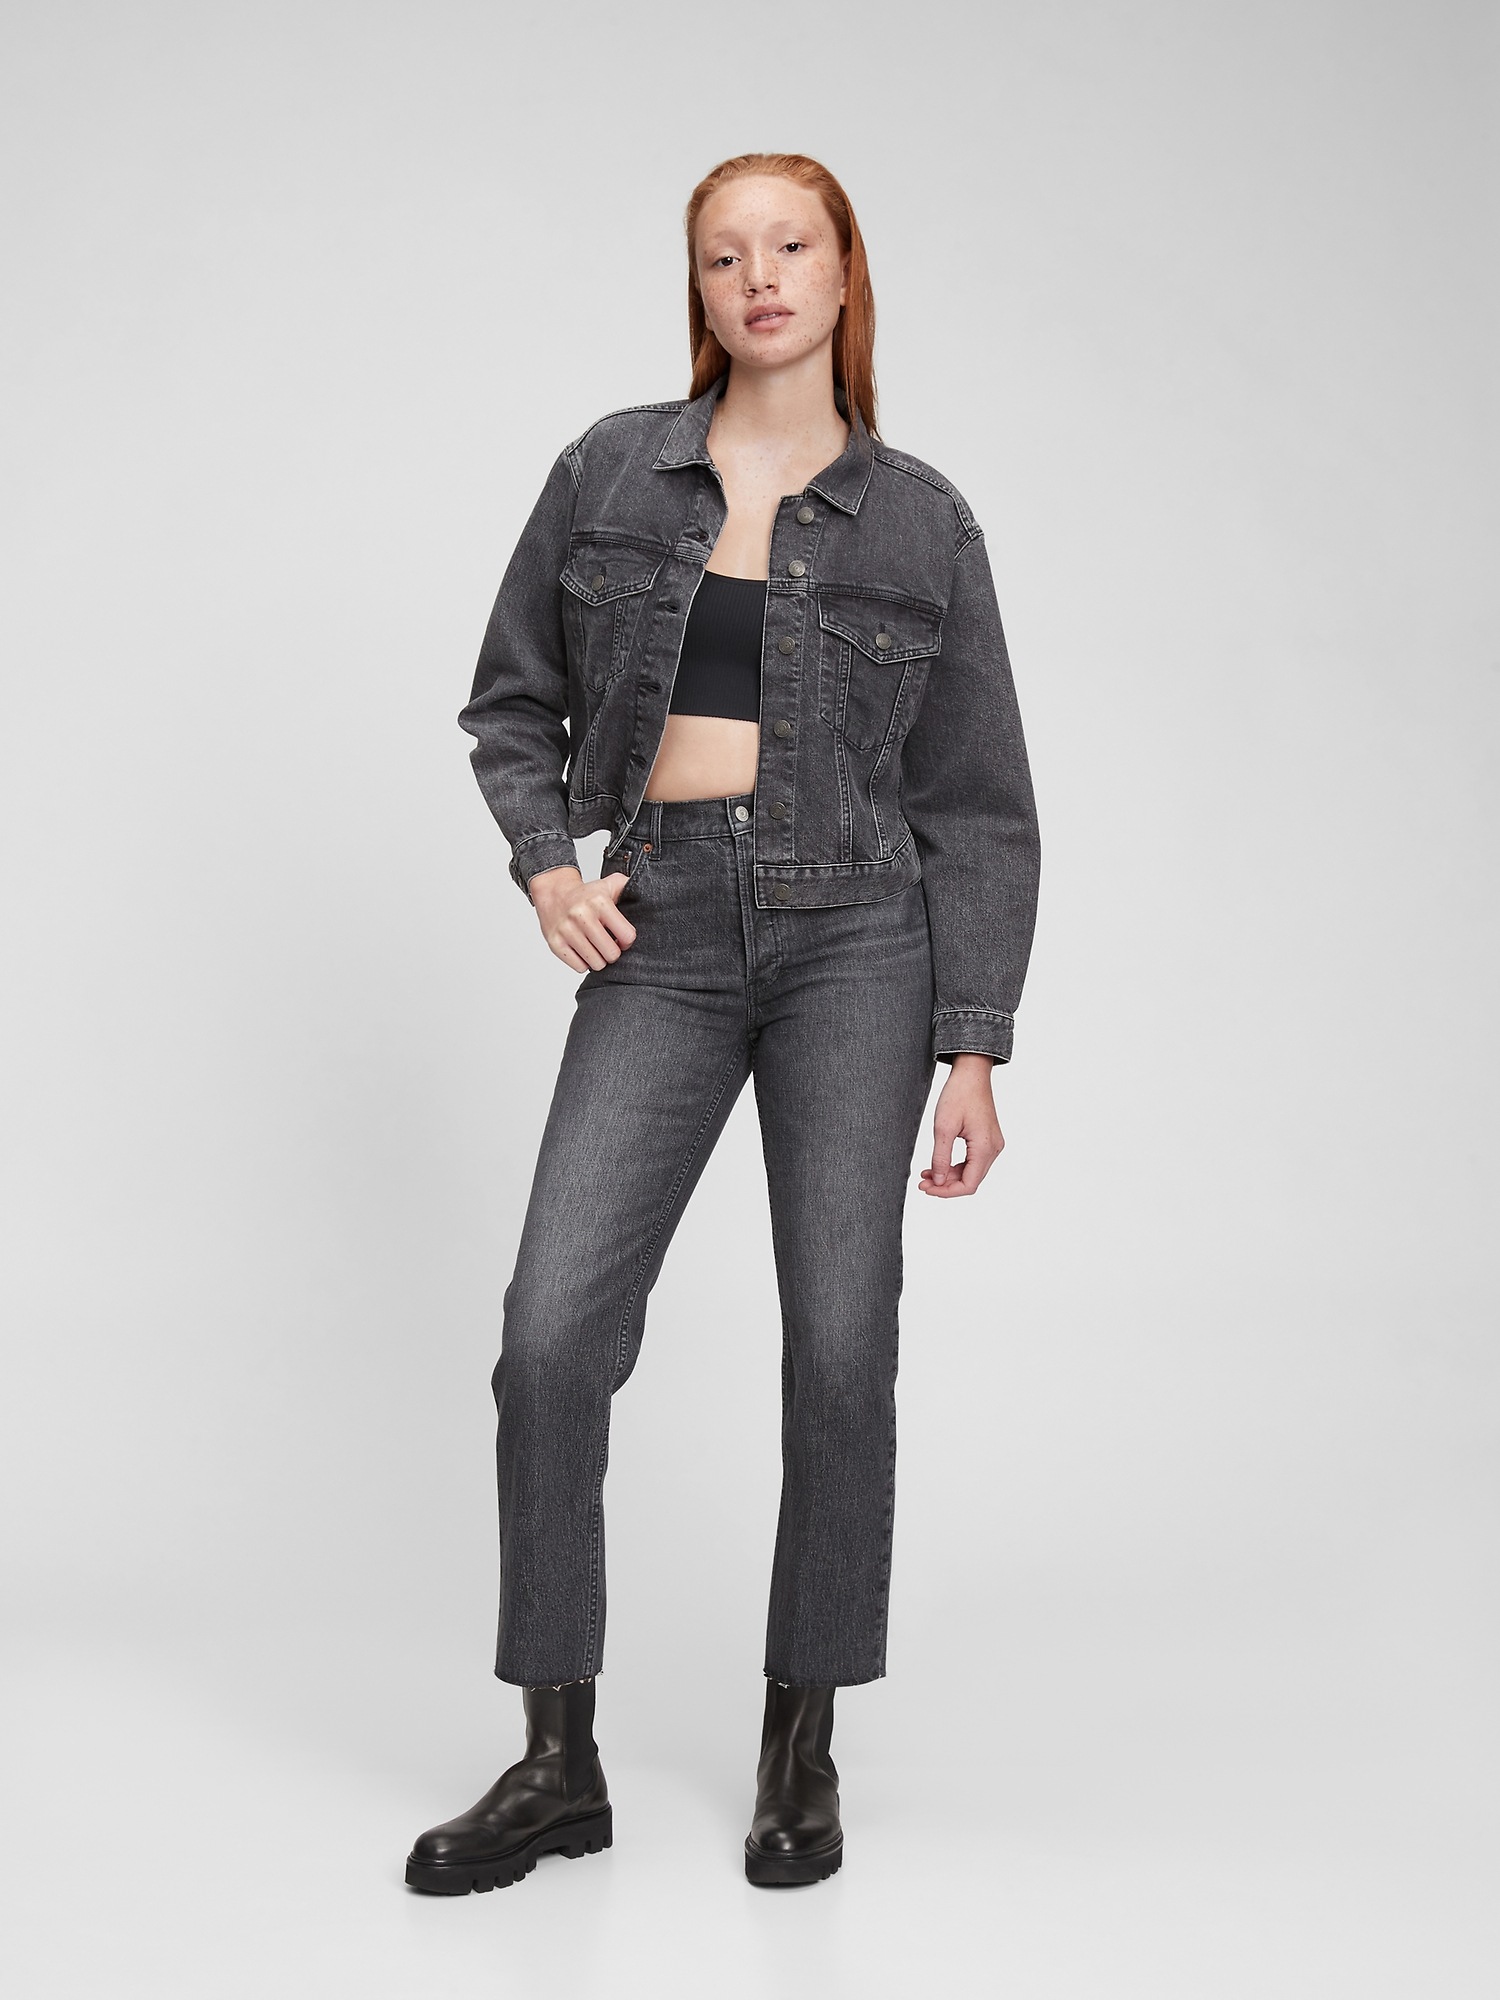 Gap High Rise Cheeky Straight Jeans with Washwell